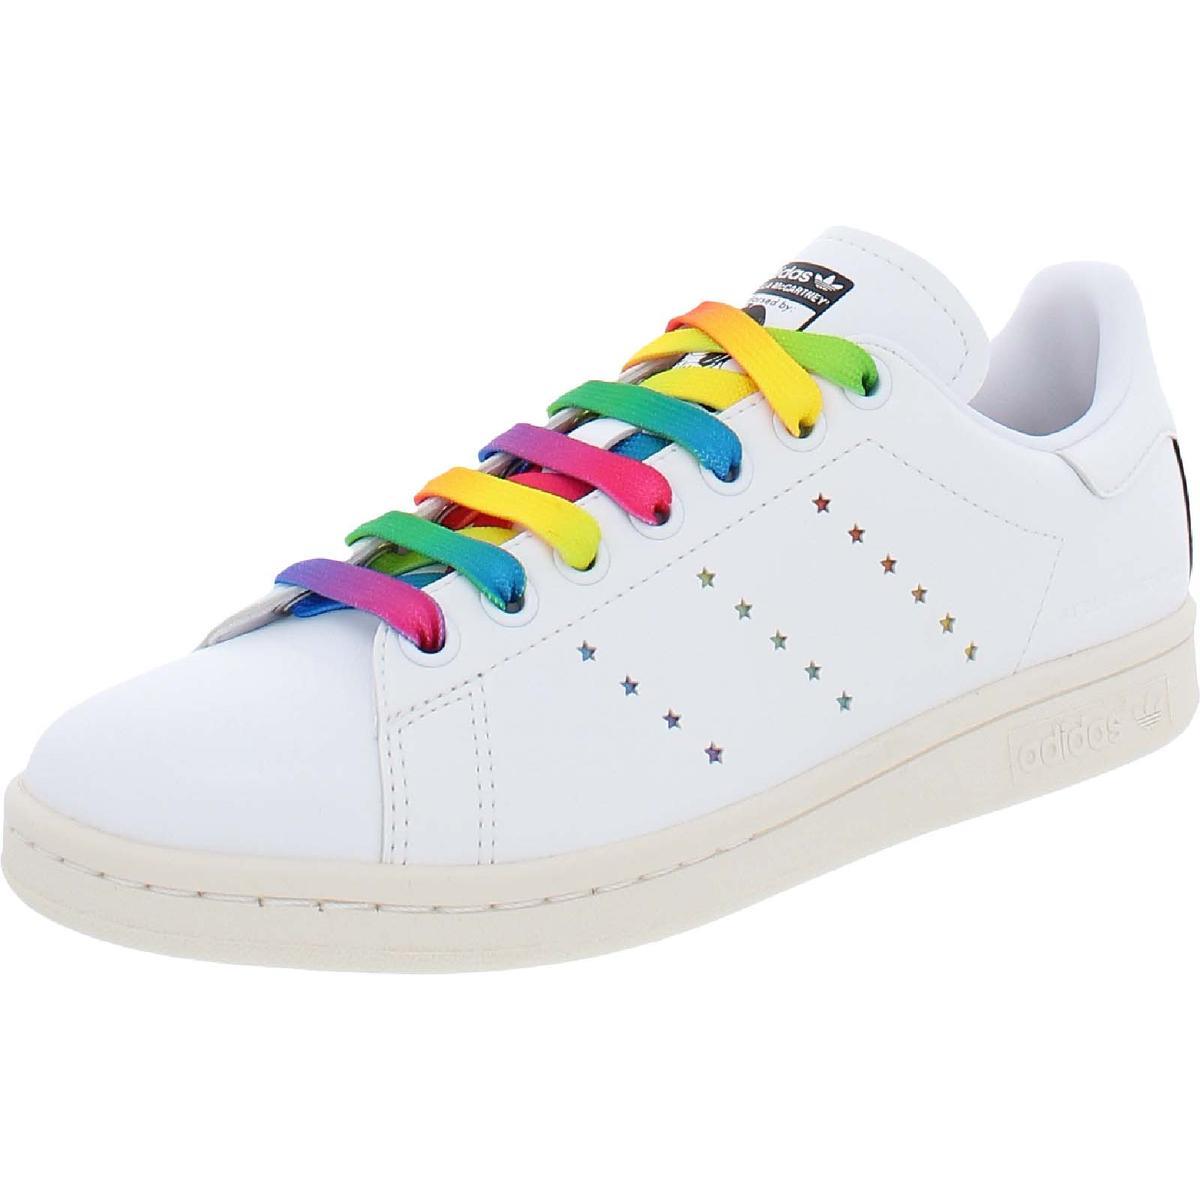 Adidas Originals Womens Stan Smith Casual and Fashion Sneakers Shoes Bhfo 7798 White/Multi